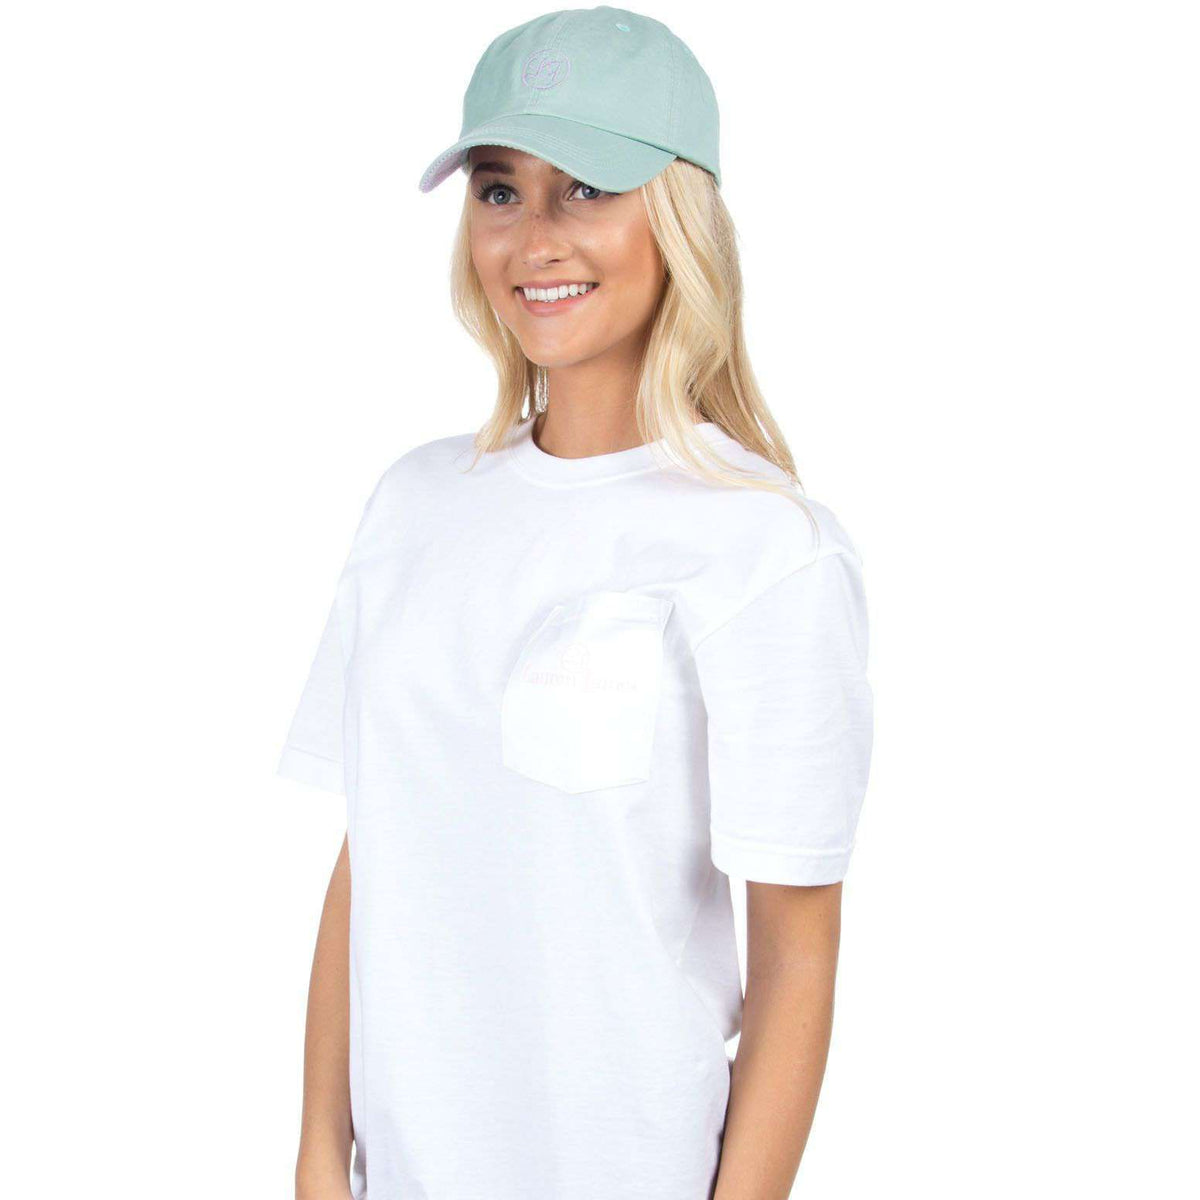 Baseball Hat in Mint by Lauren James - Country Club Prep